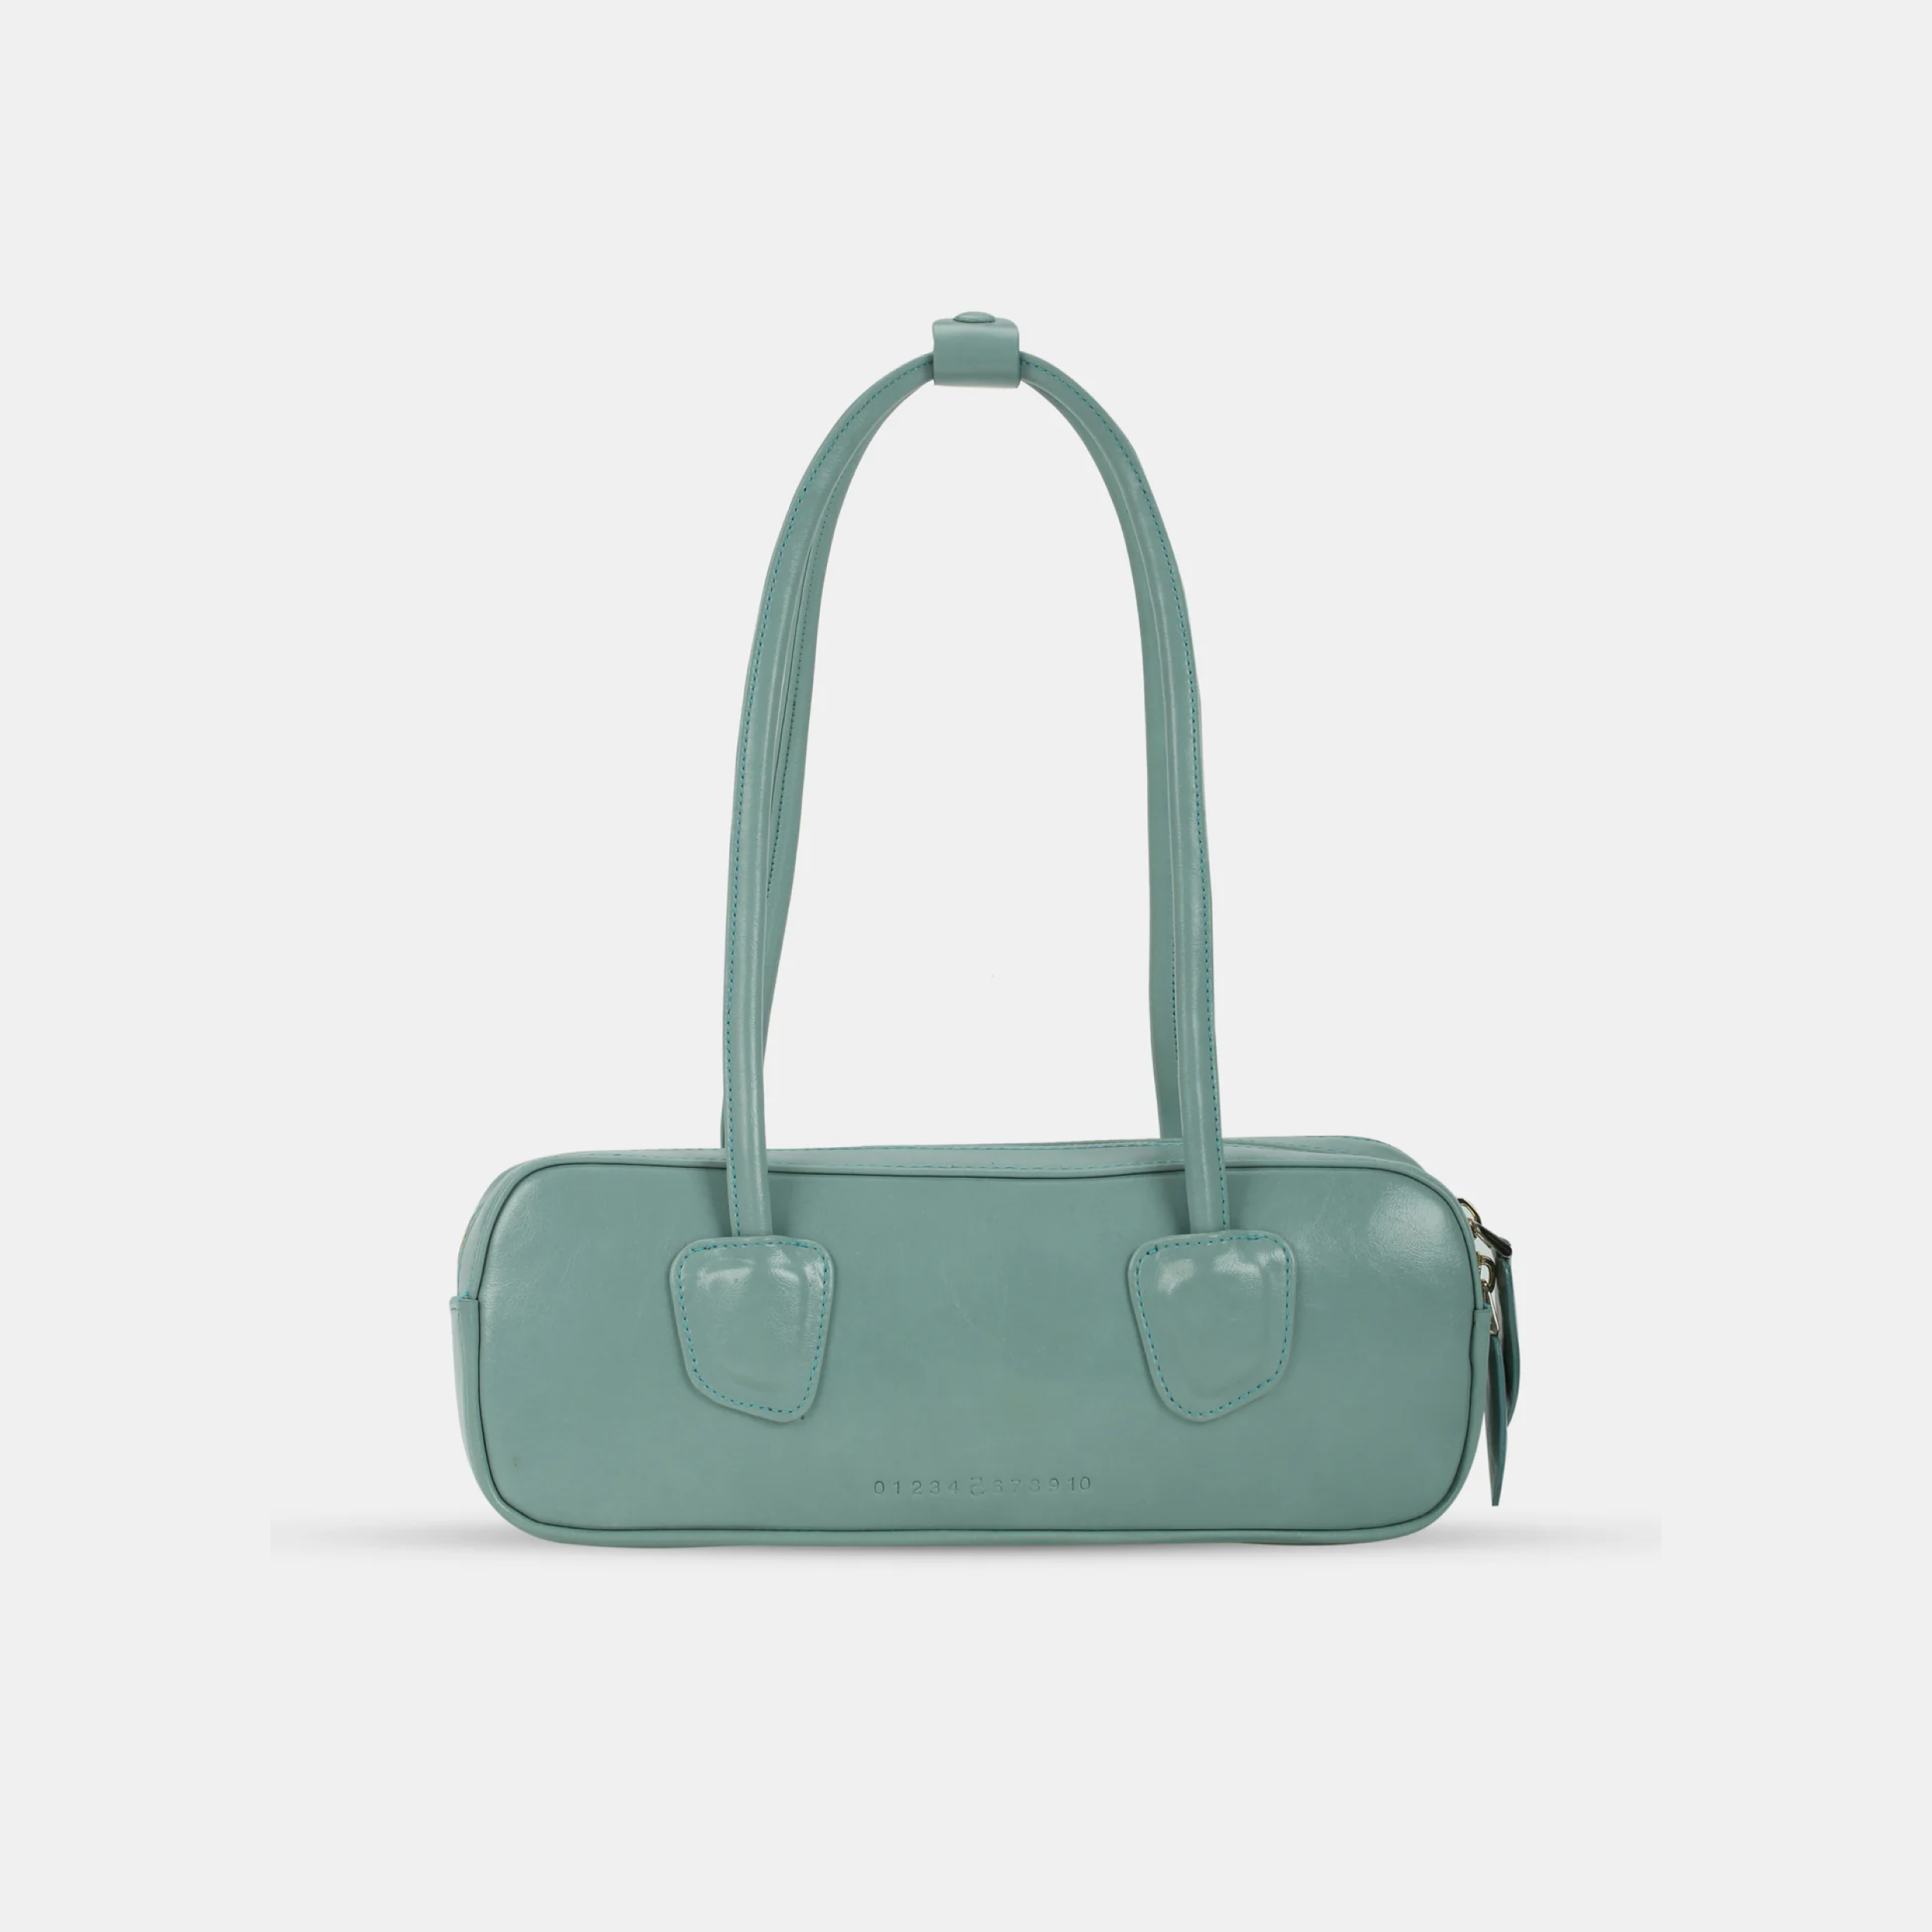 BREAKING bag in pastel turquoise color